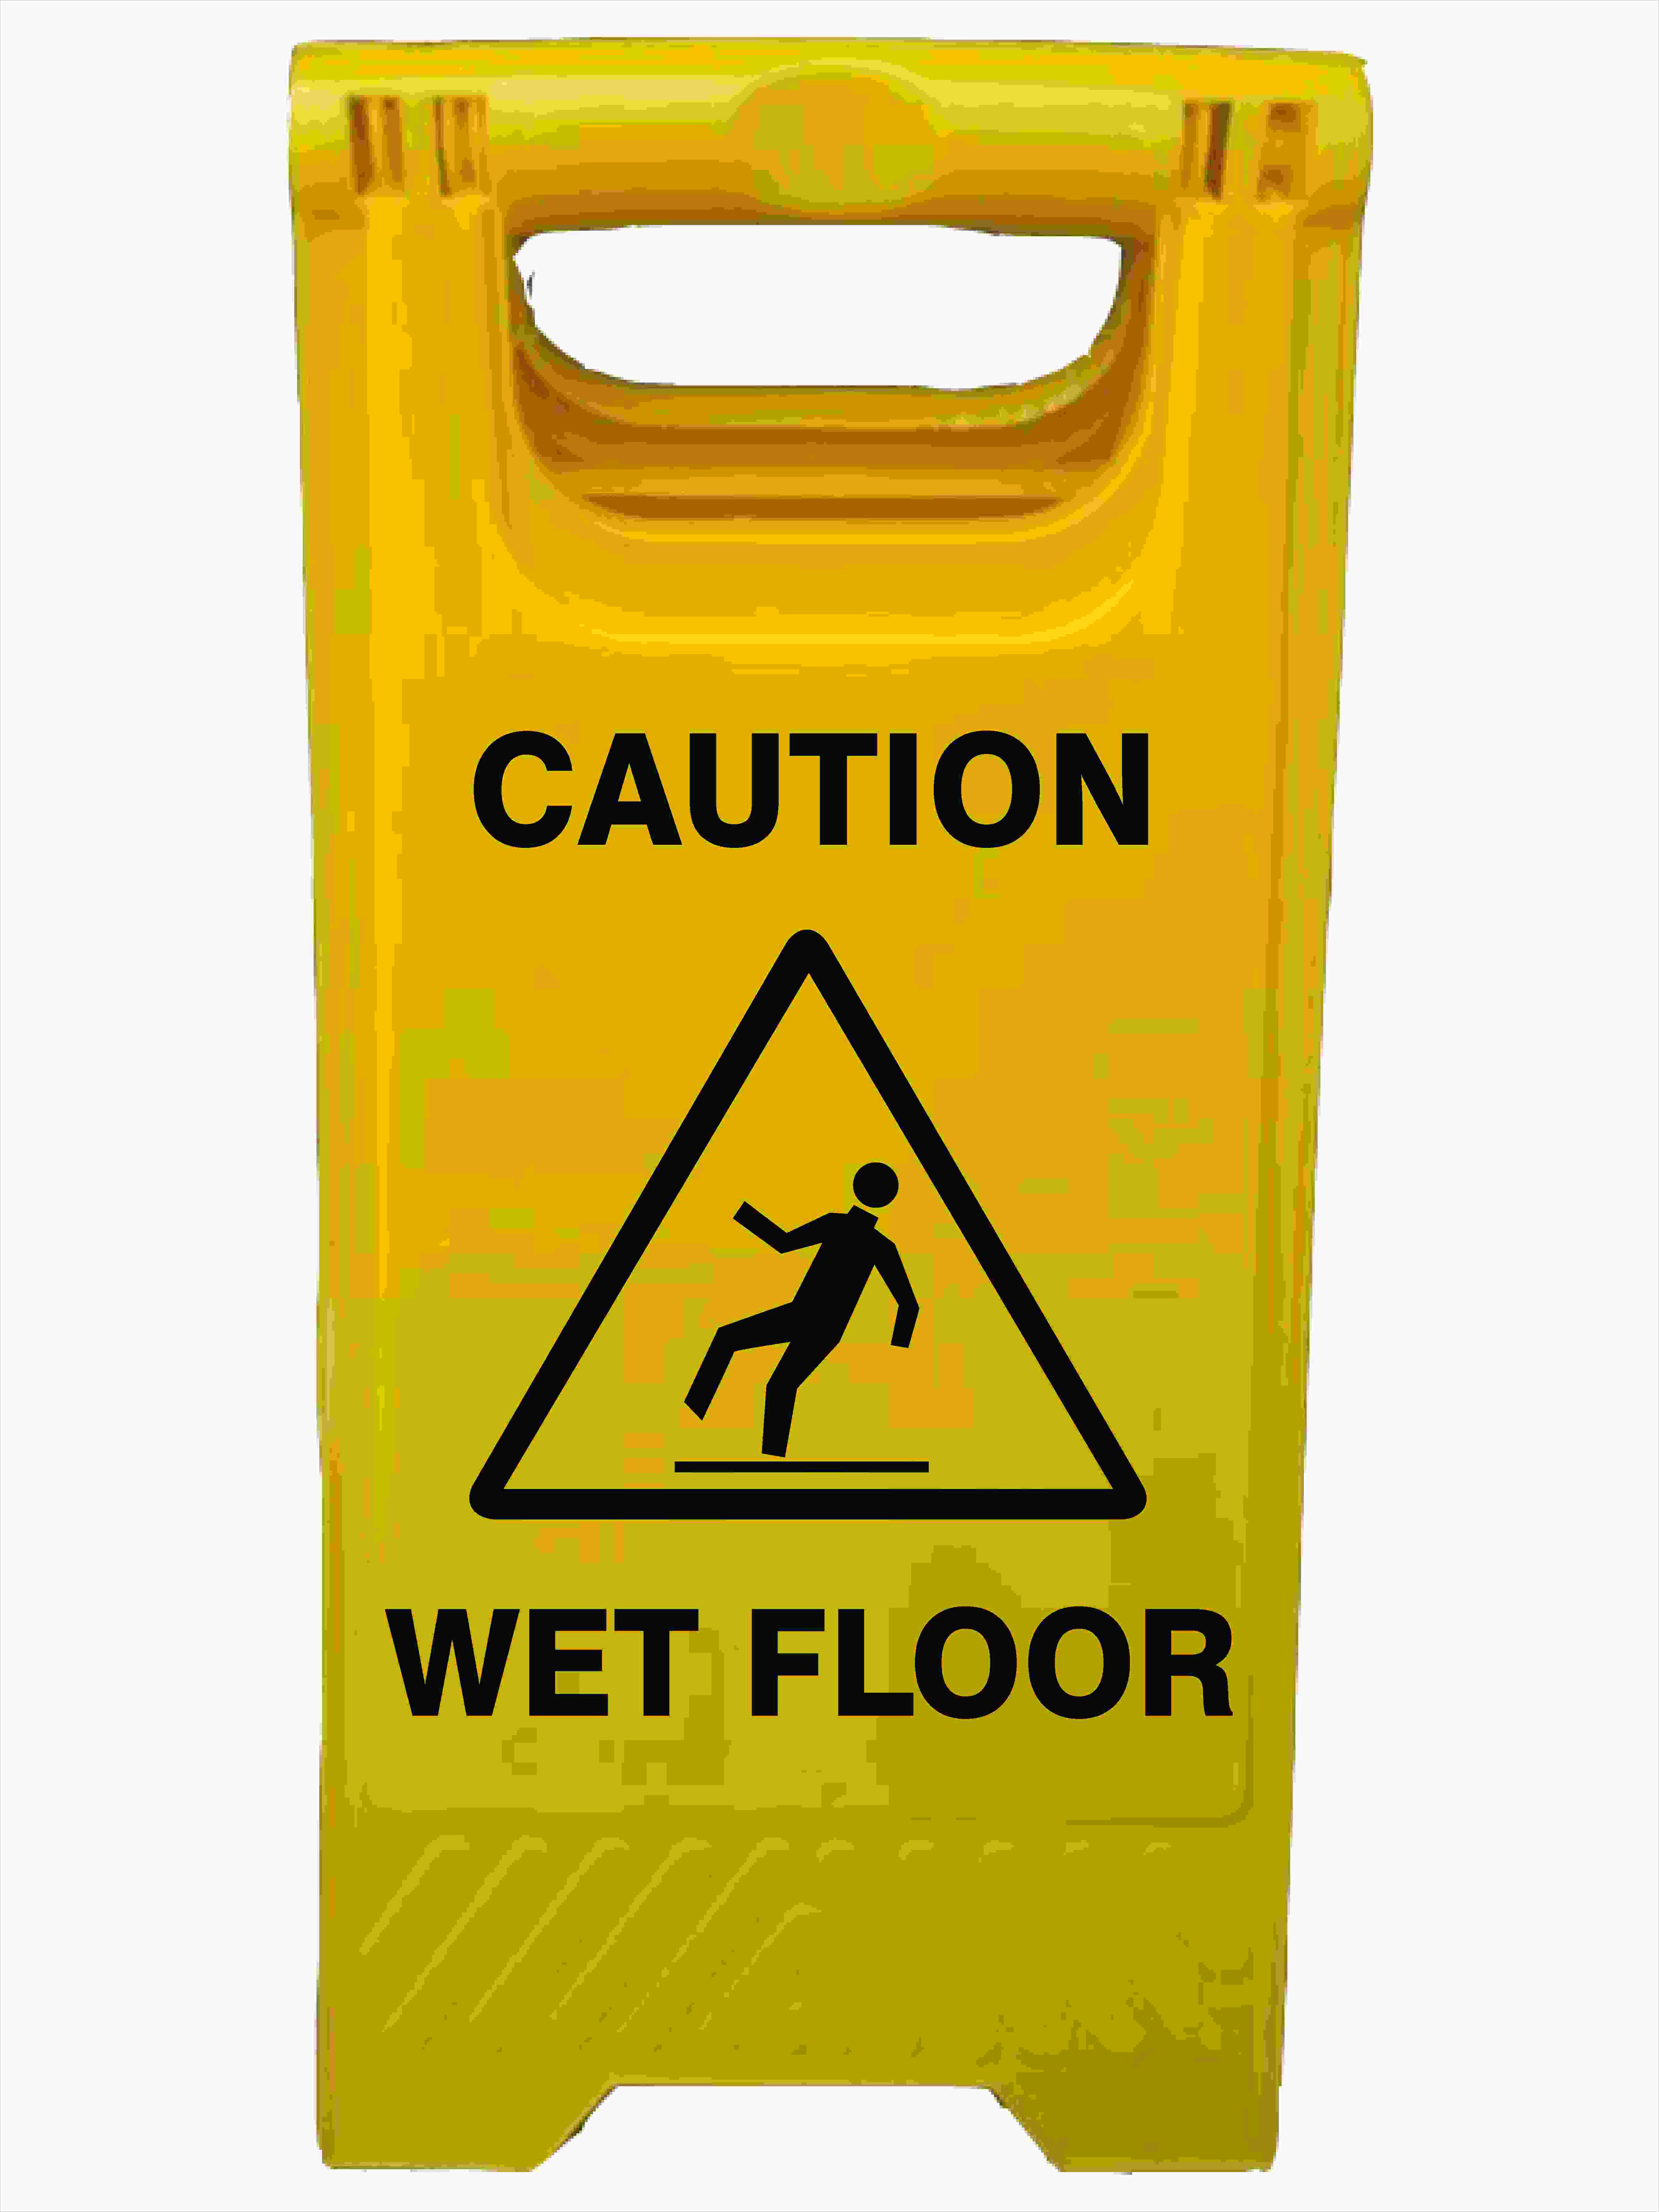 CAUTION WET FLOOR | Buy Now | Discount Safety Signs Australia